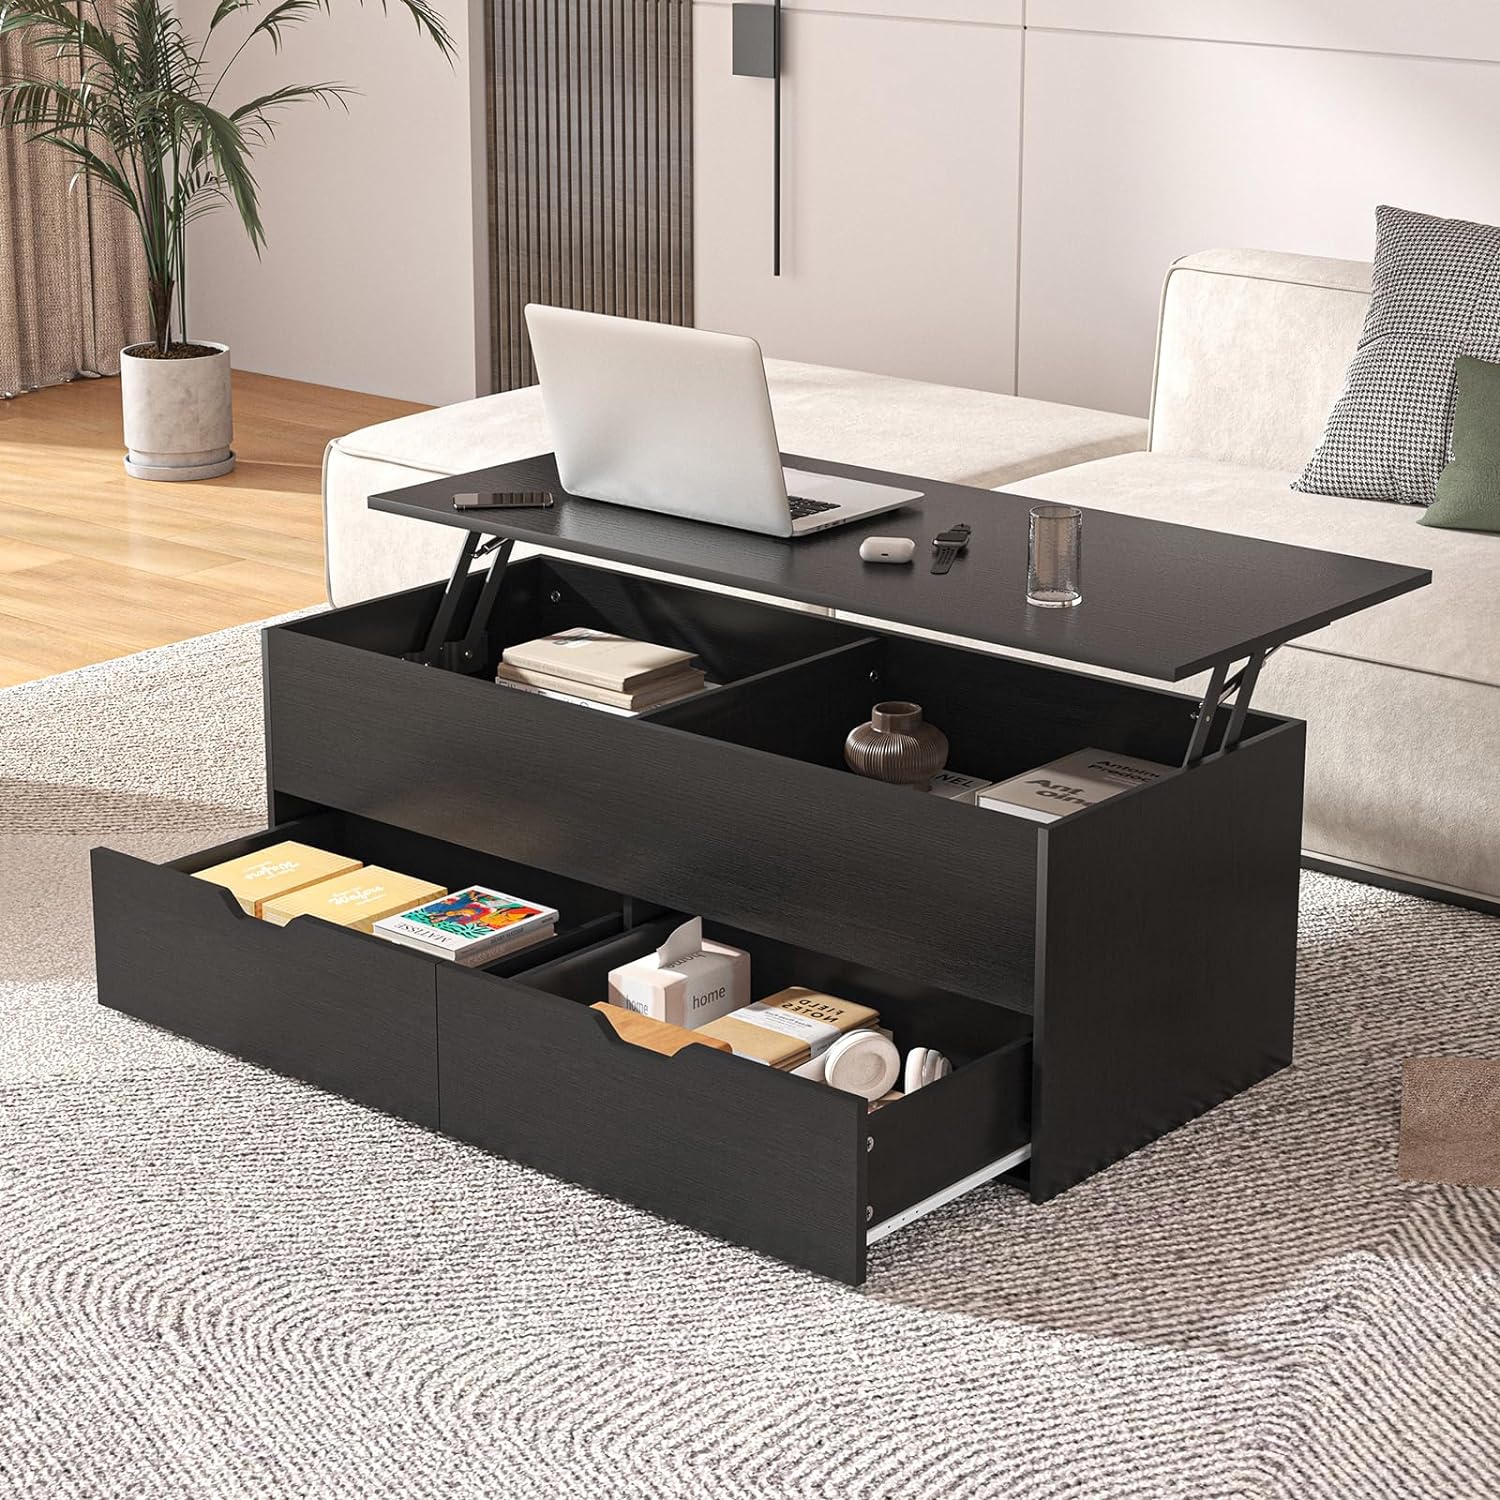 Lift Top Coffee Table for Living Room, Coffee Table Morden High Gloss Black 3 Tiers Modern Tea Table with Storage Center Tables Hidden Compartment & 2 Drawers